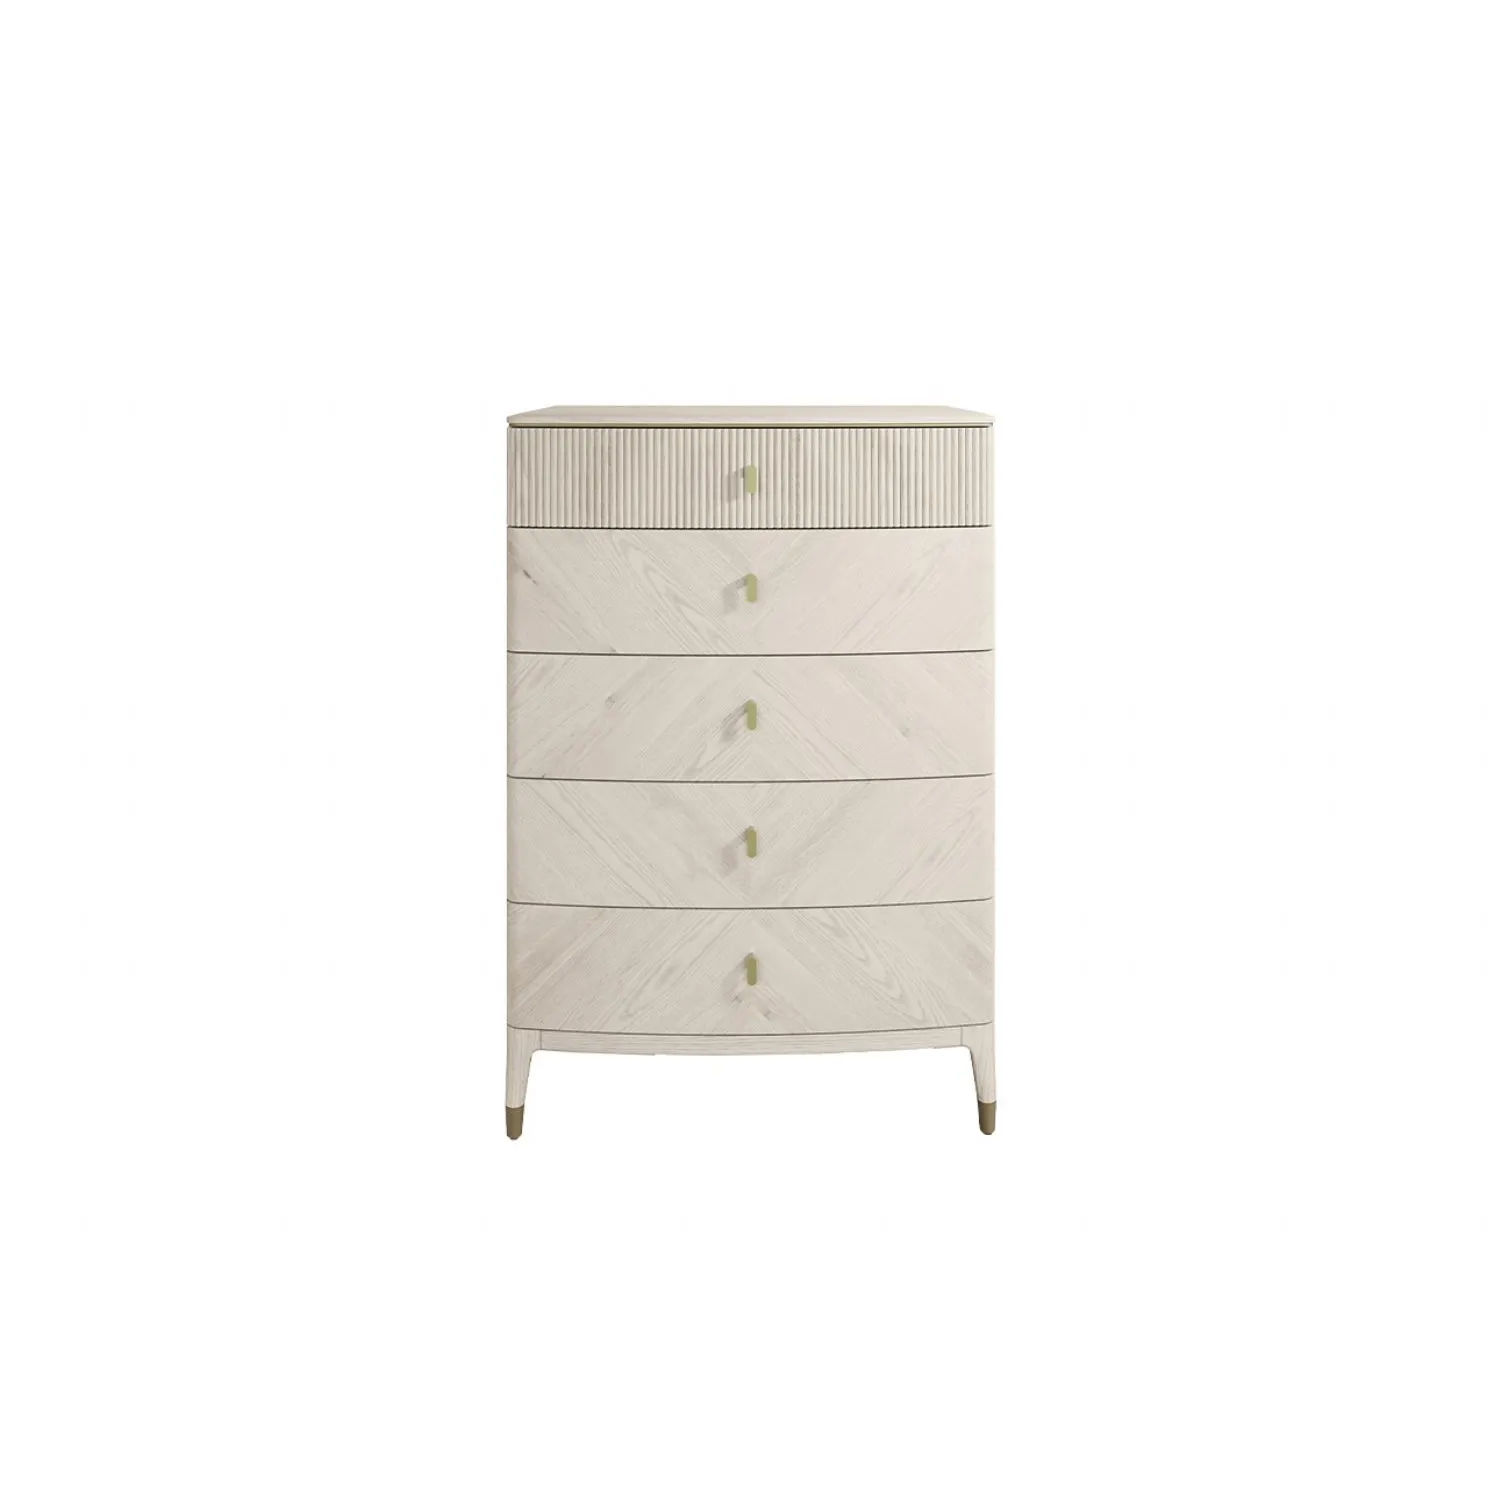 Stone White Wooden Tall Chest of 5 Storage Drawers